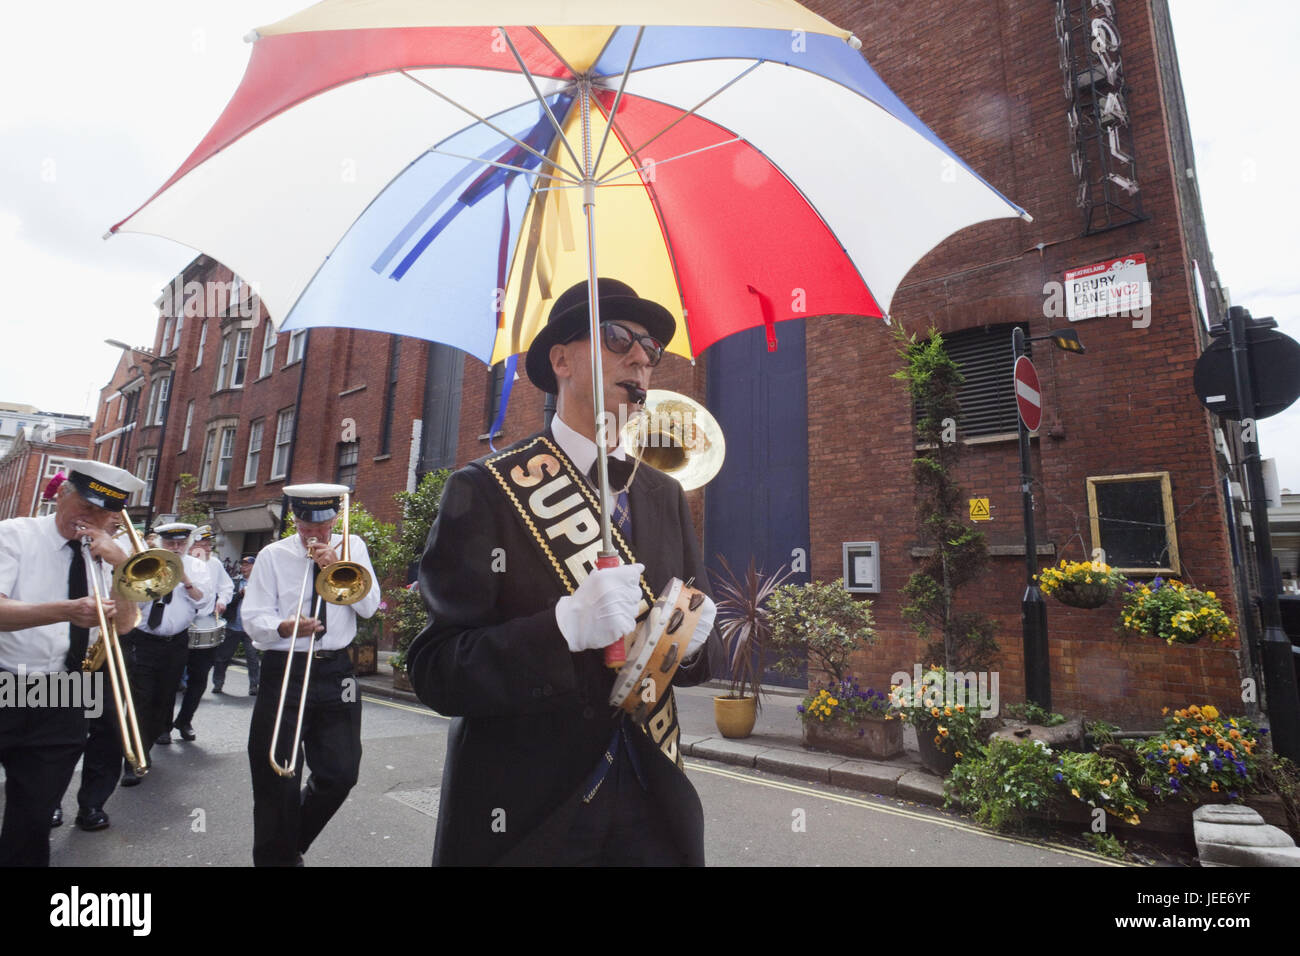 England, London, Covent guards, Brass cord, Annual Street save, birthday of Mr. Punch celebrate, town, street save, conversationist, entertainment, save, cord, band, band, music, musician, person, procession, conductor, umbrella, Stock Photo